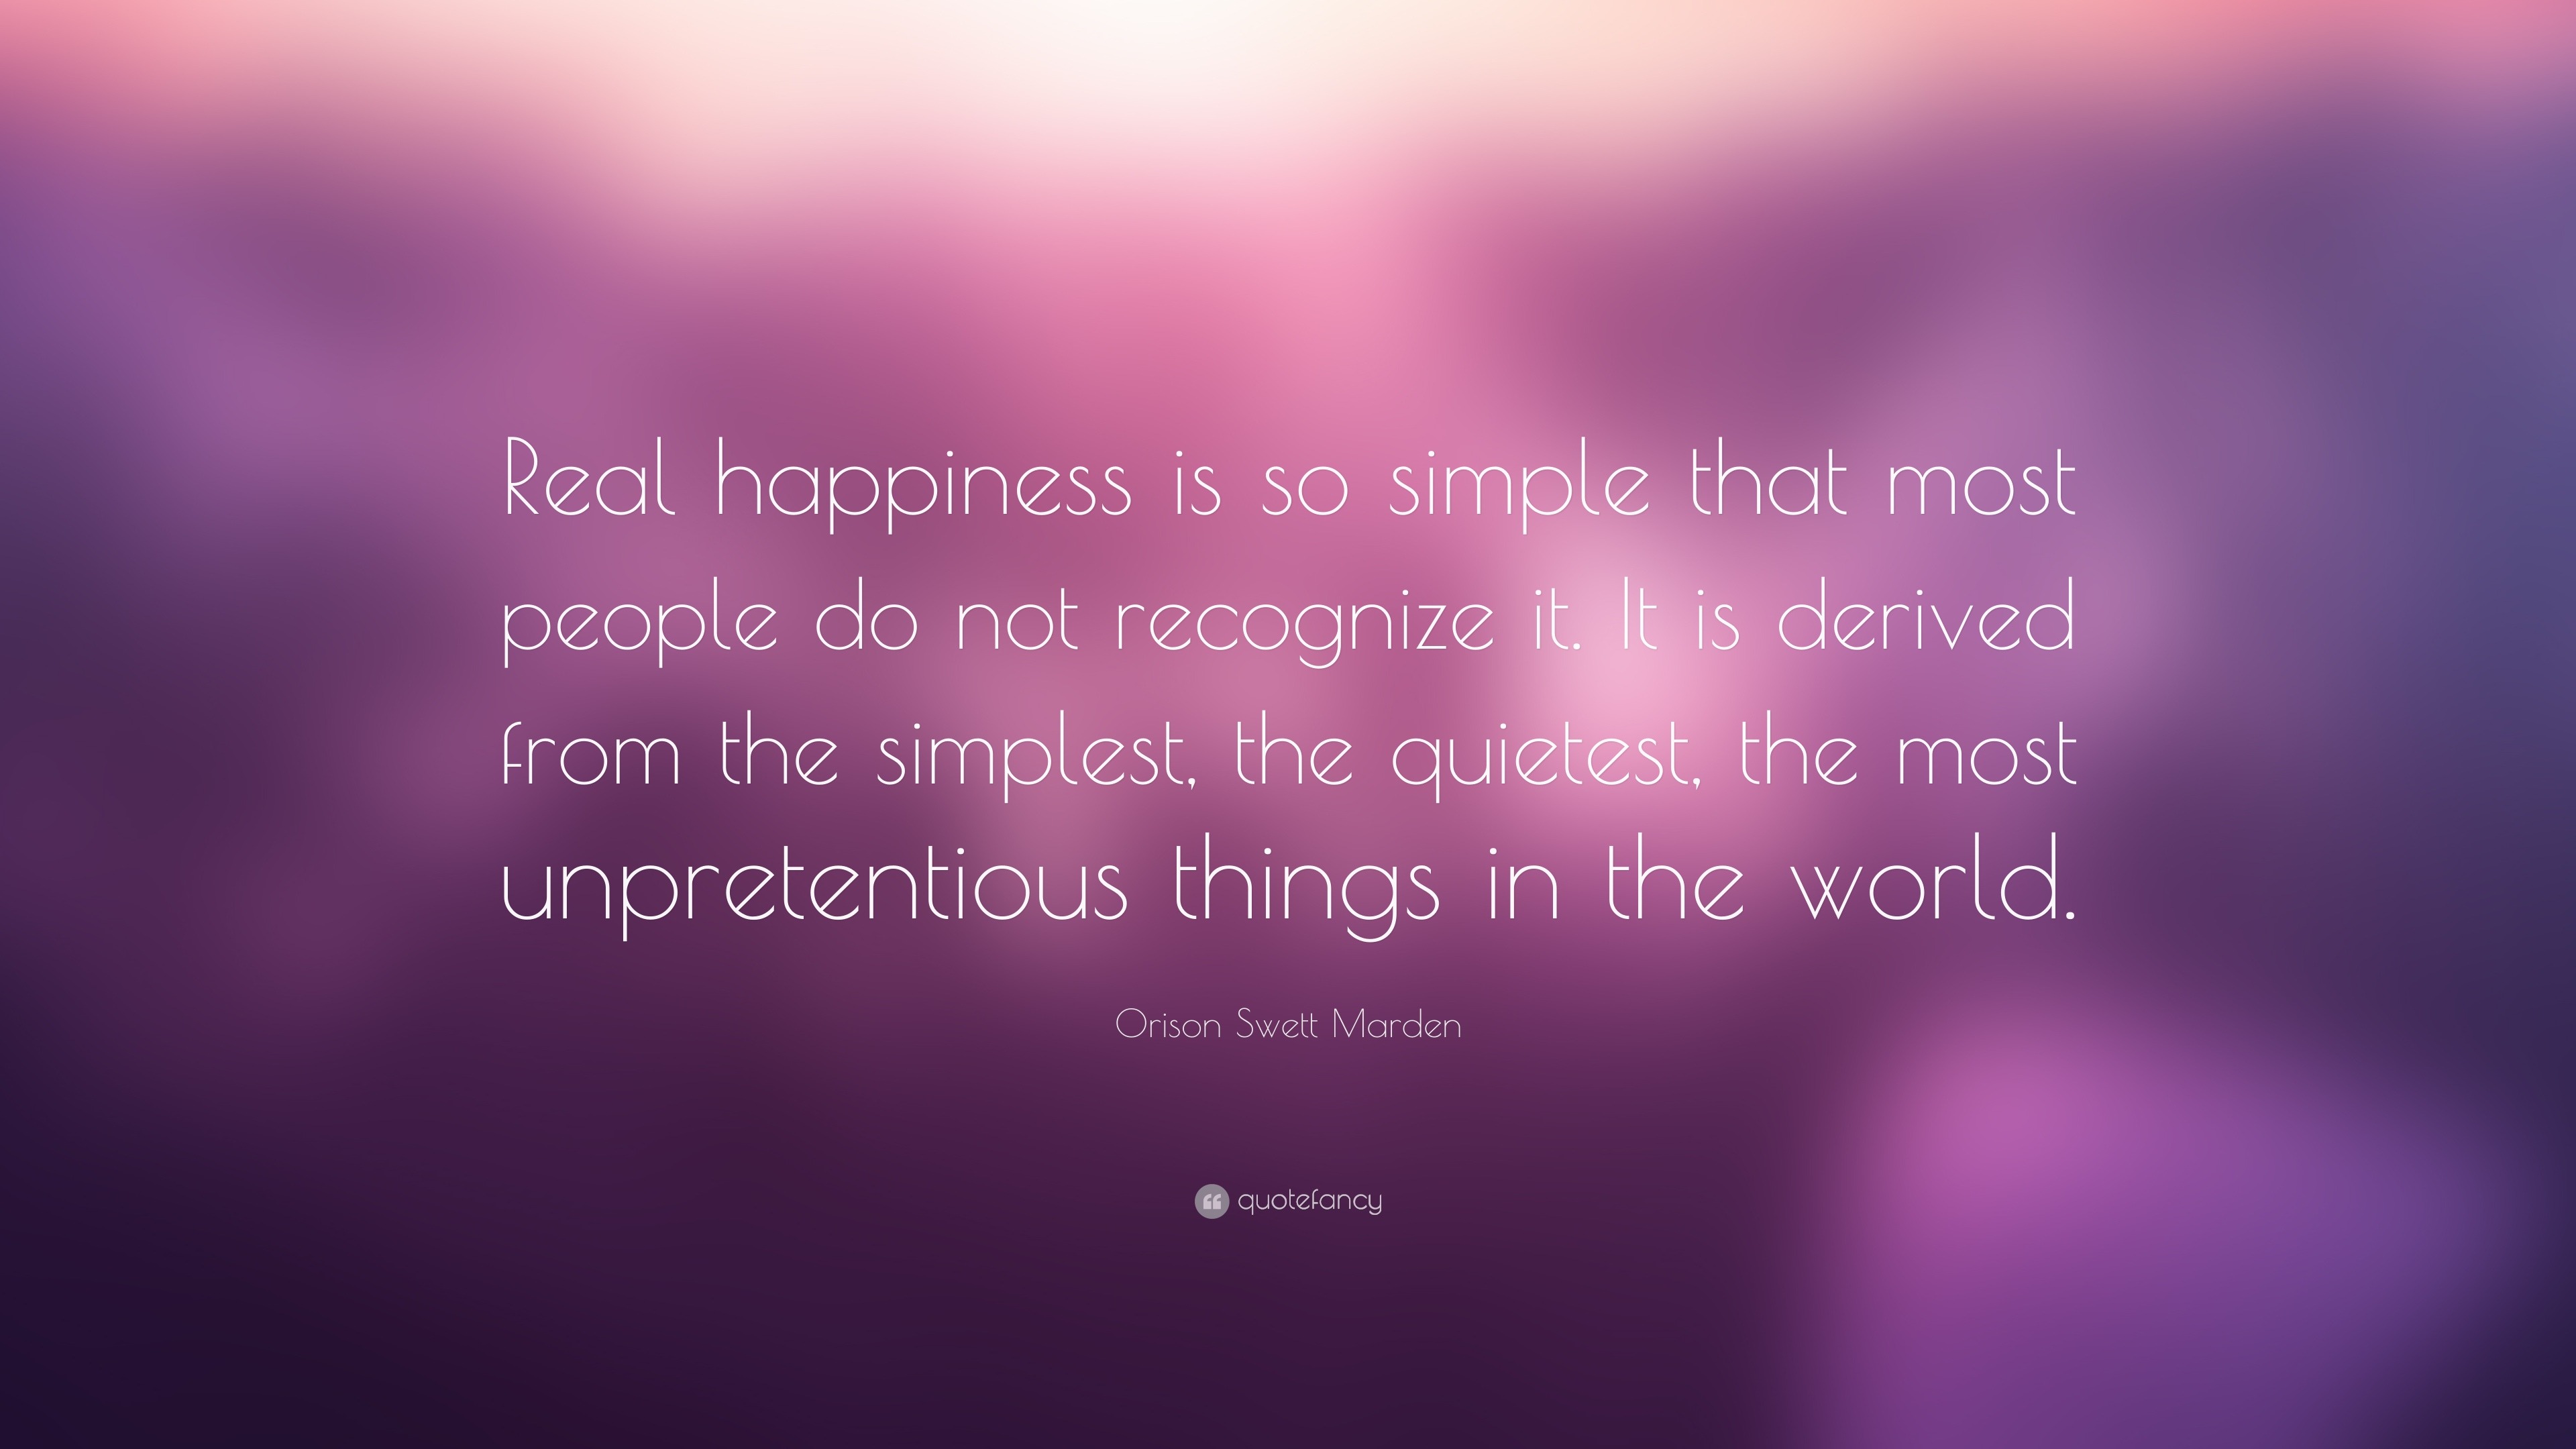 Orison Swett Marden Quote: "Real happiness is so simple ...